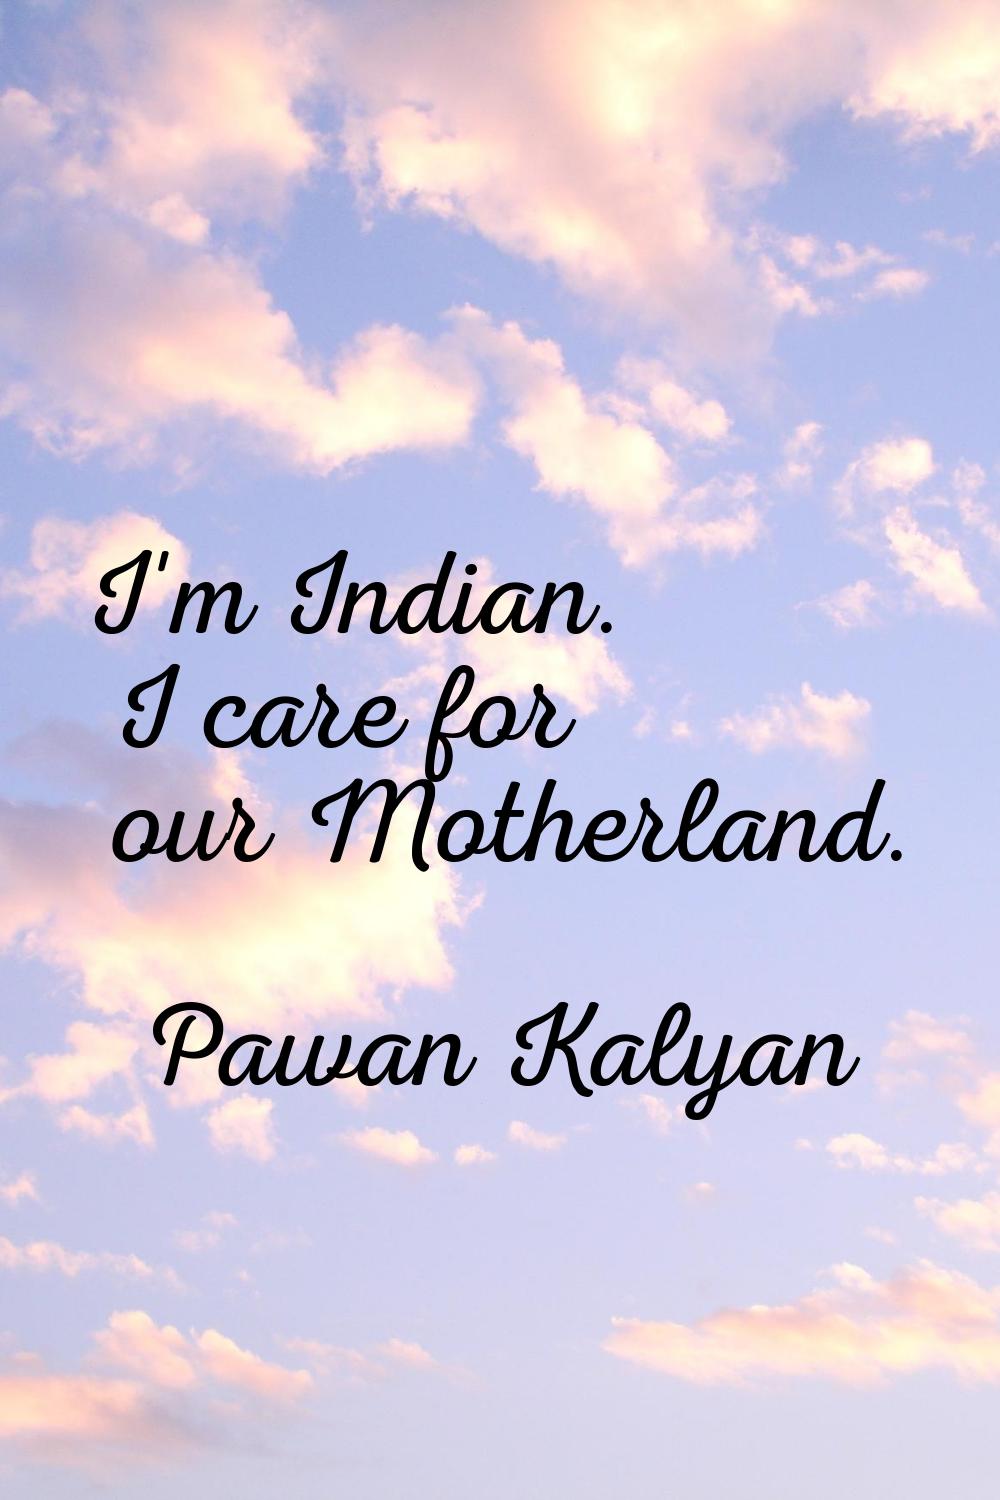 I'm Indian. I care for our Motherland.